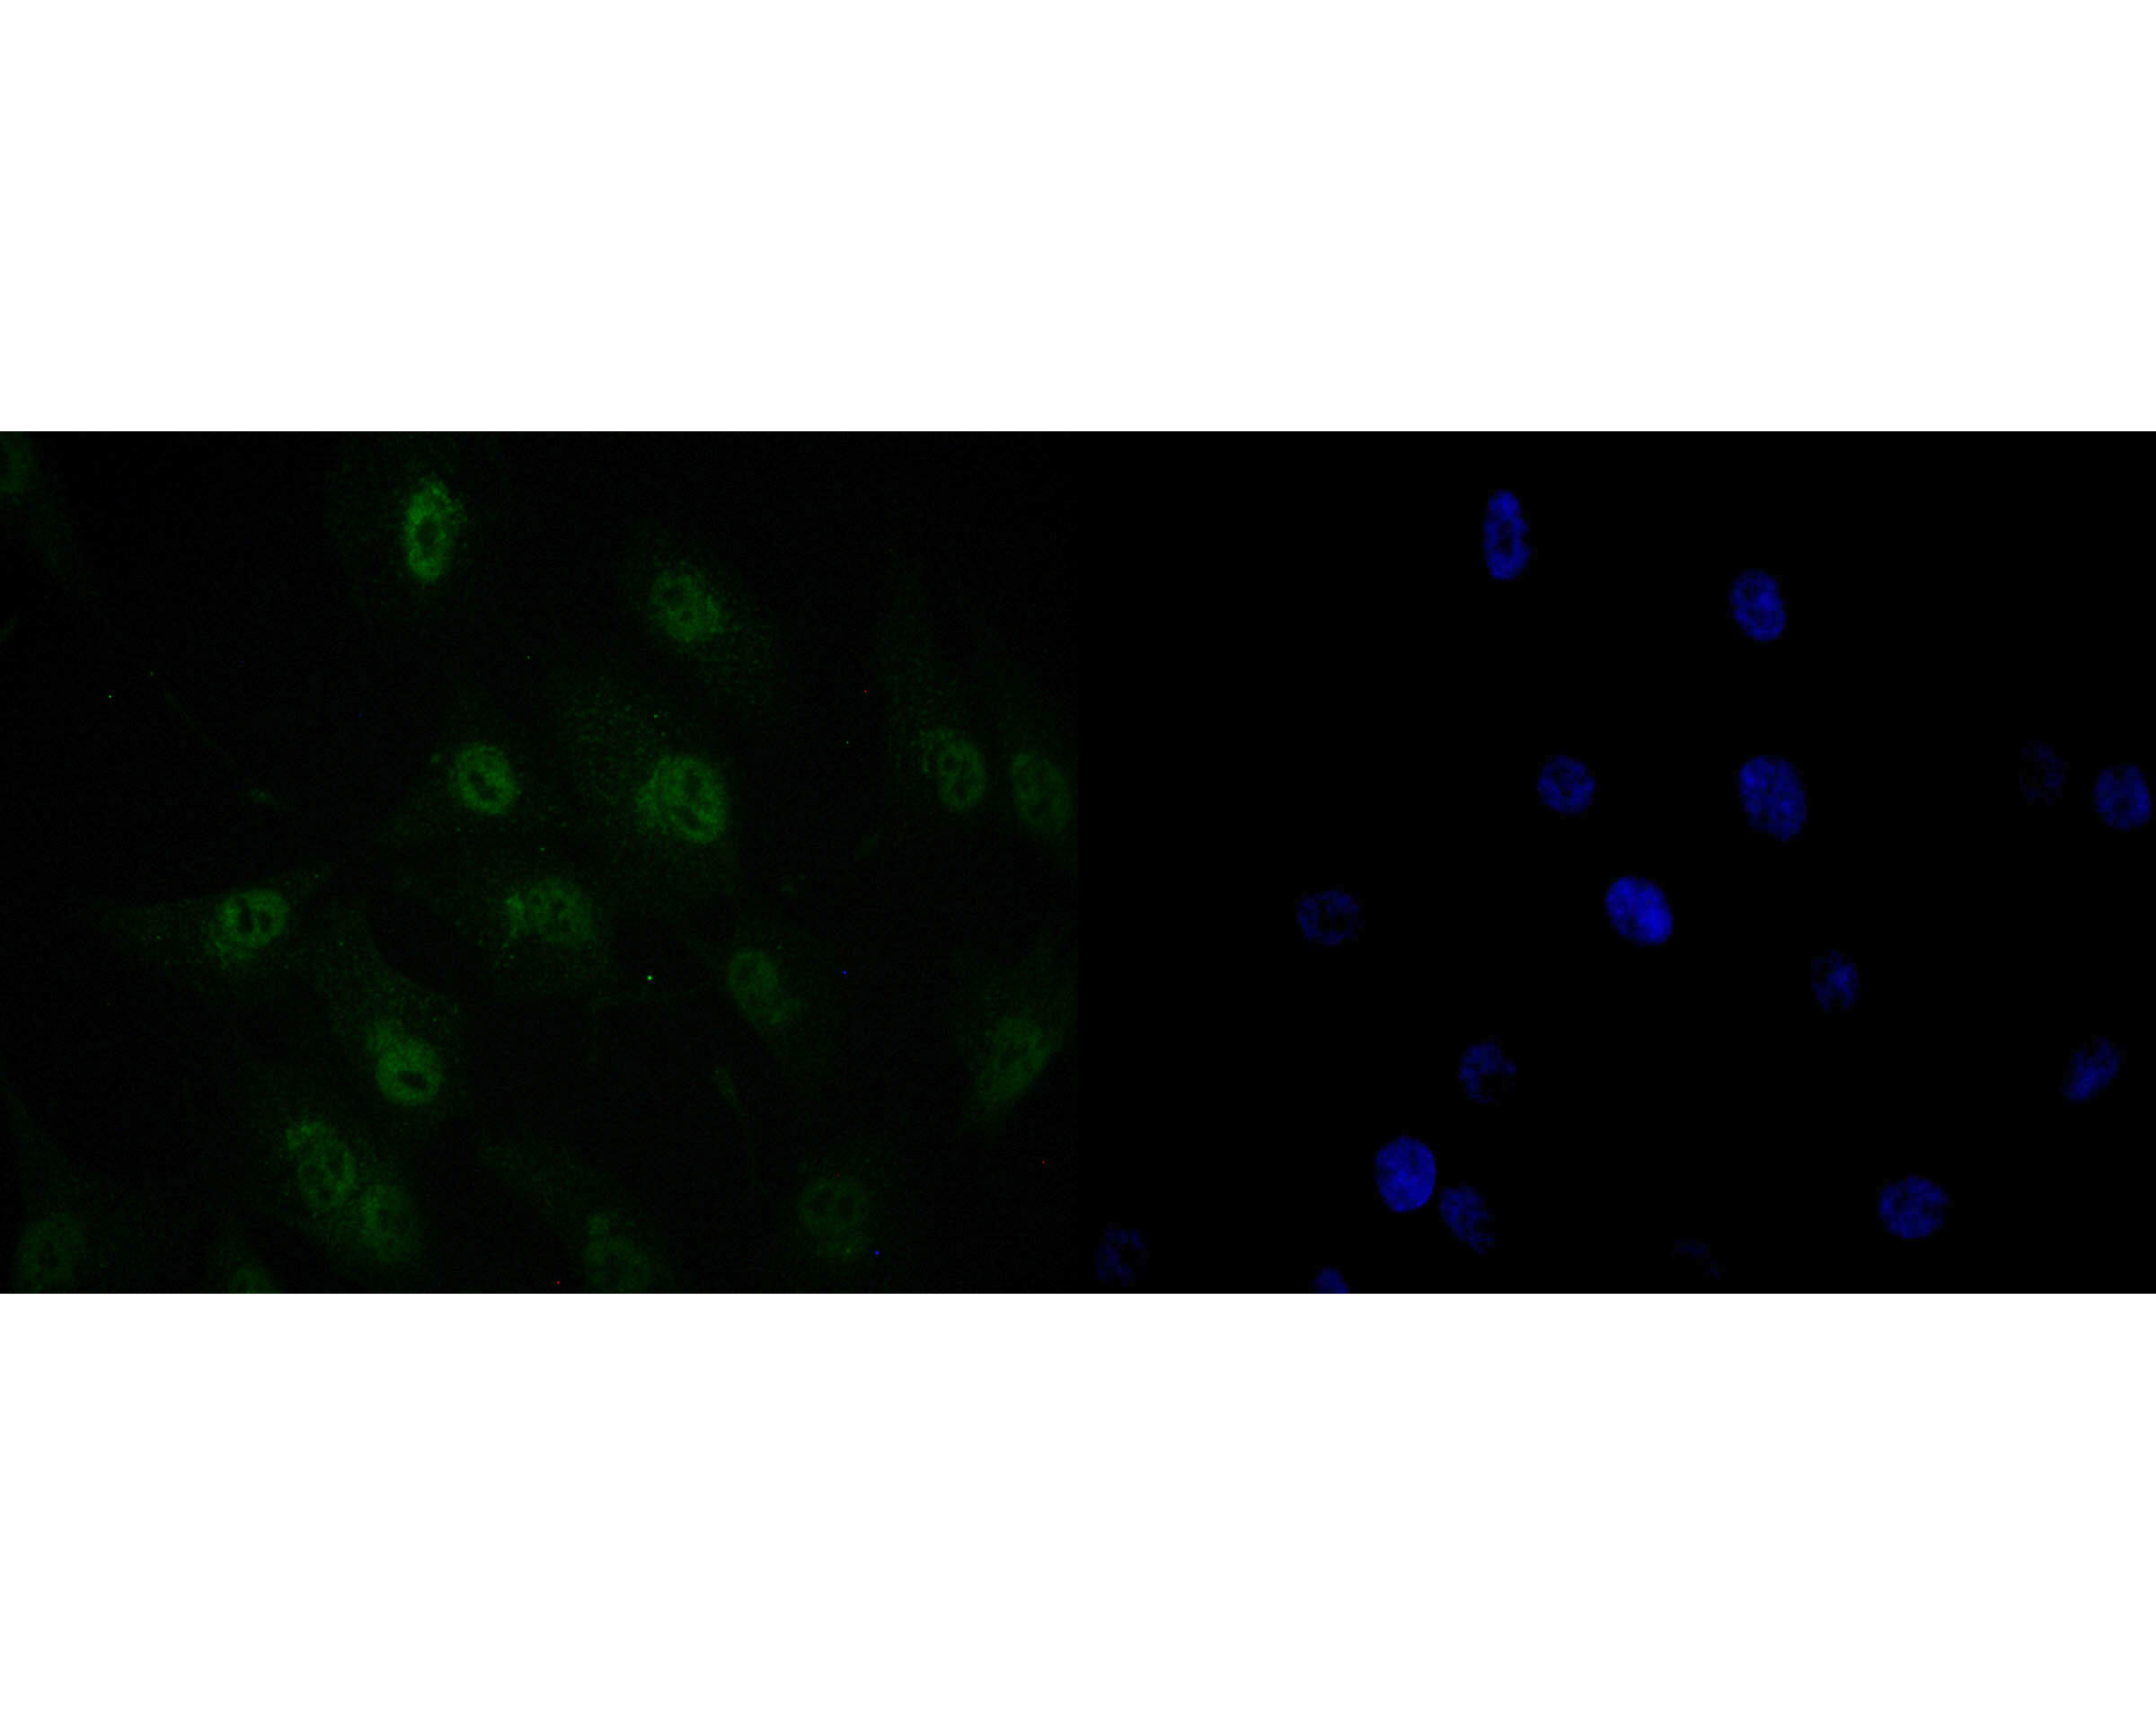 ICC staining of SFRS3 in MG-63 cells (green). Formalin fixed cells were permeabilized with 0.1% Triton X-100 in TBS for 10 minutes at room temperature and blocked with 10% negative goat serum for 15 minutes at room temperature. Cells were probed with the primary antibody (ET7109-47, 1/50) for 1 hour at room temperature, washed with PBS. Alexa Fluor®488 conjugate-Goat anti-Rabbit IgG was used as the secondary antibody at 1/1,000 dilution. The nuclear counter stain is DAPI (blue).